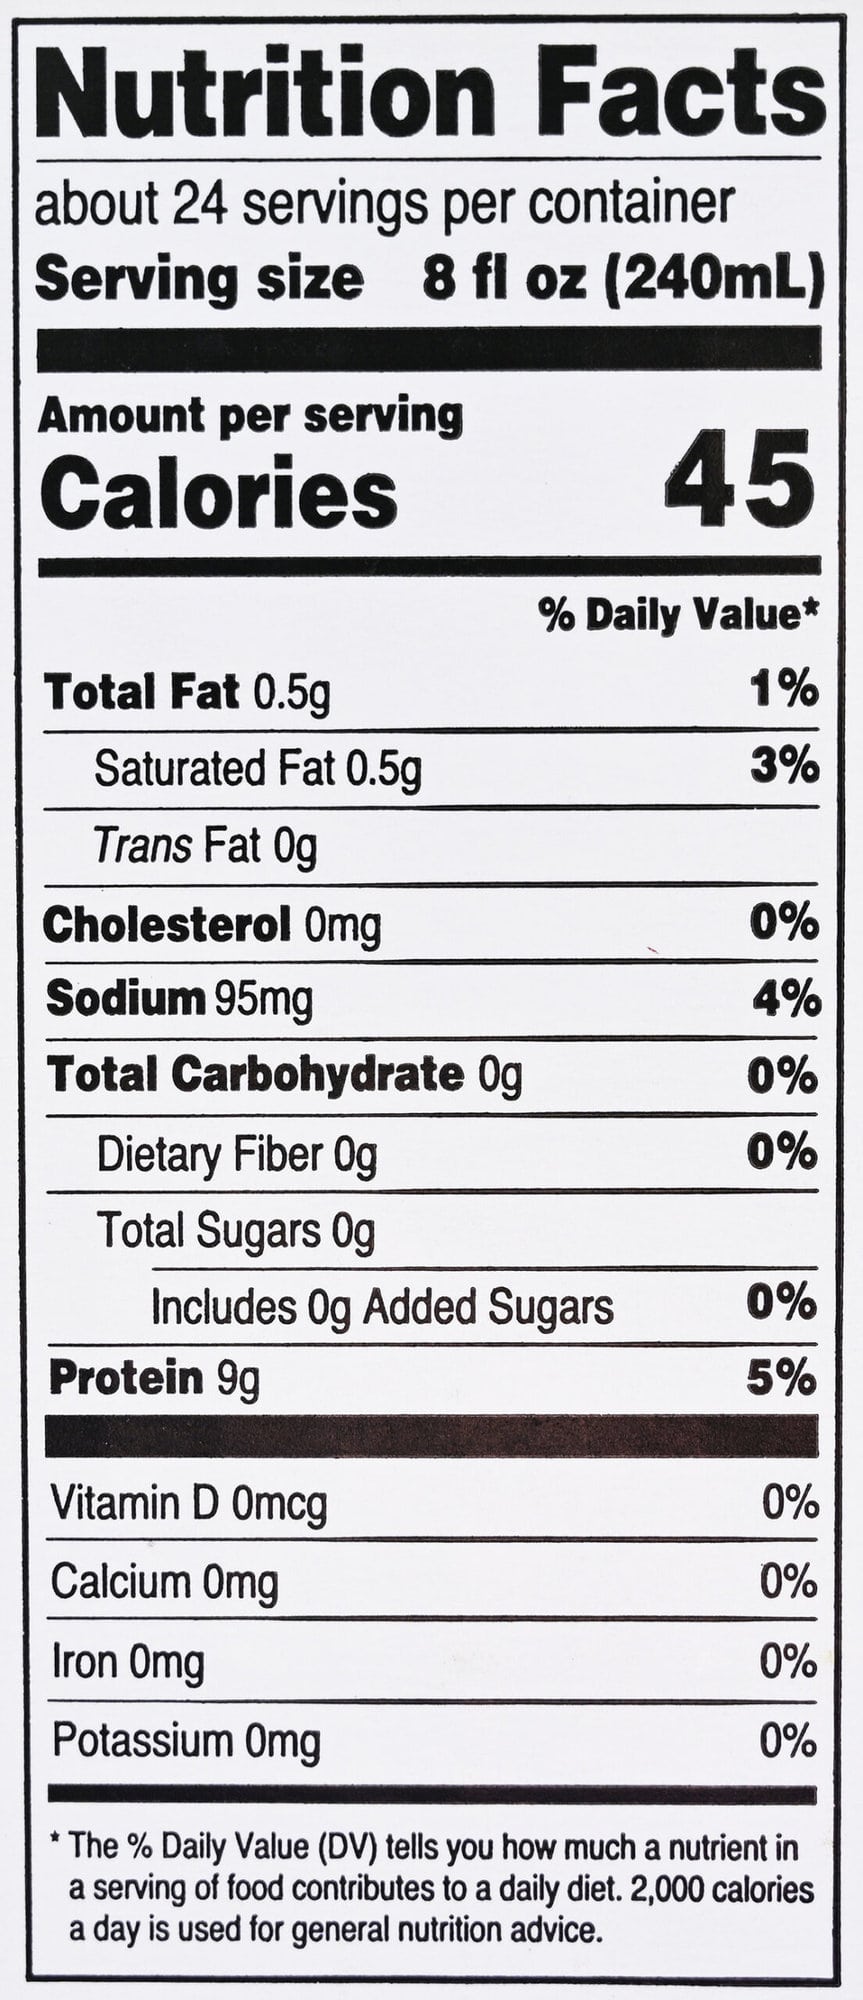 Image of the nutrition facts for the bone broth from the back of the container.